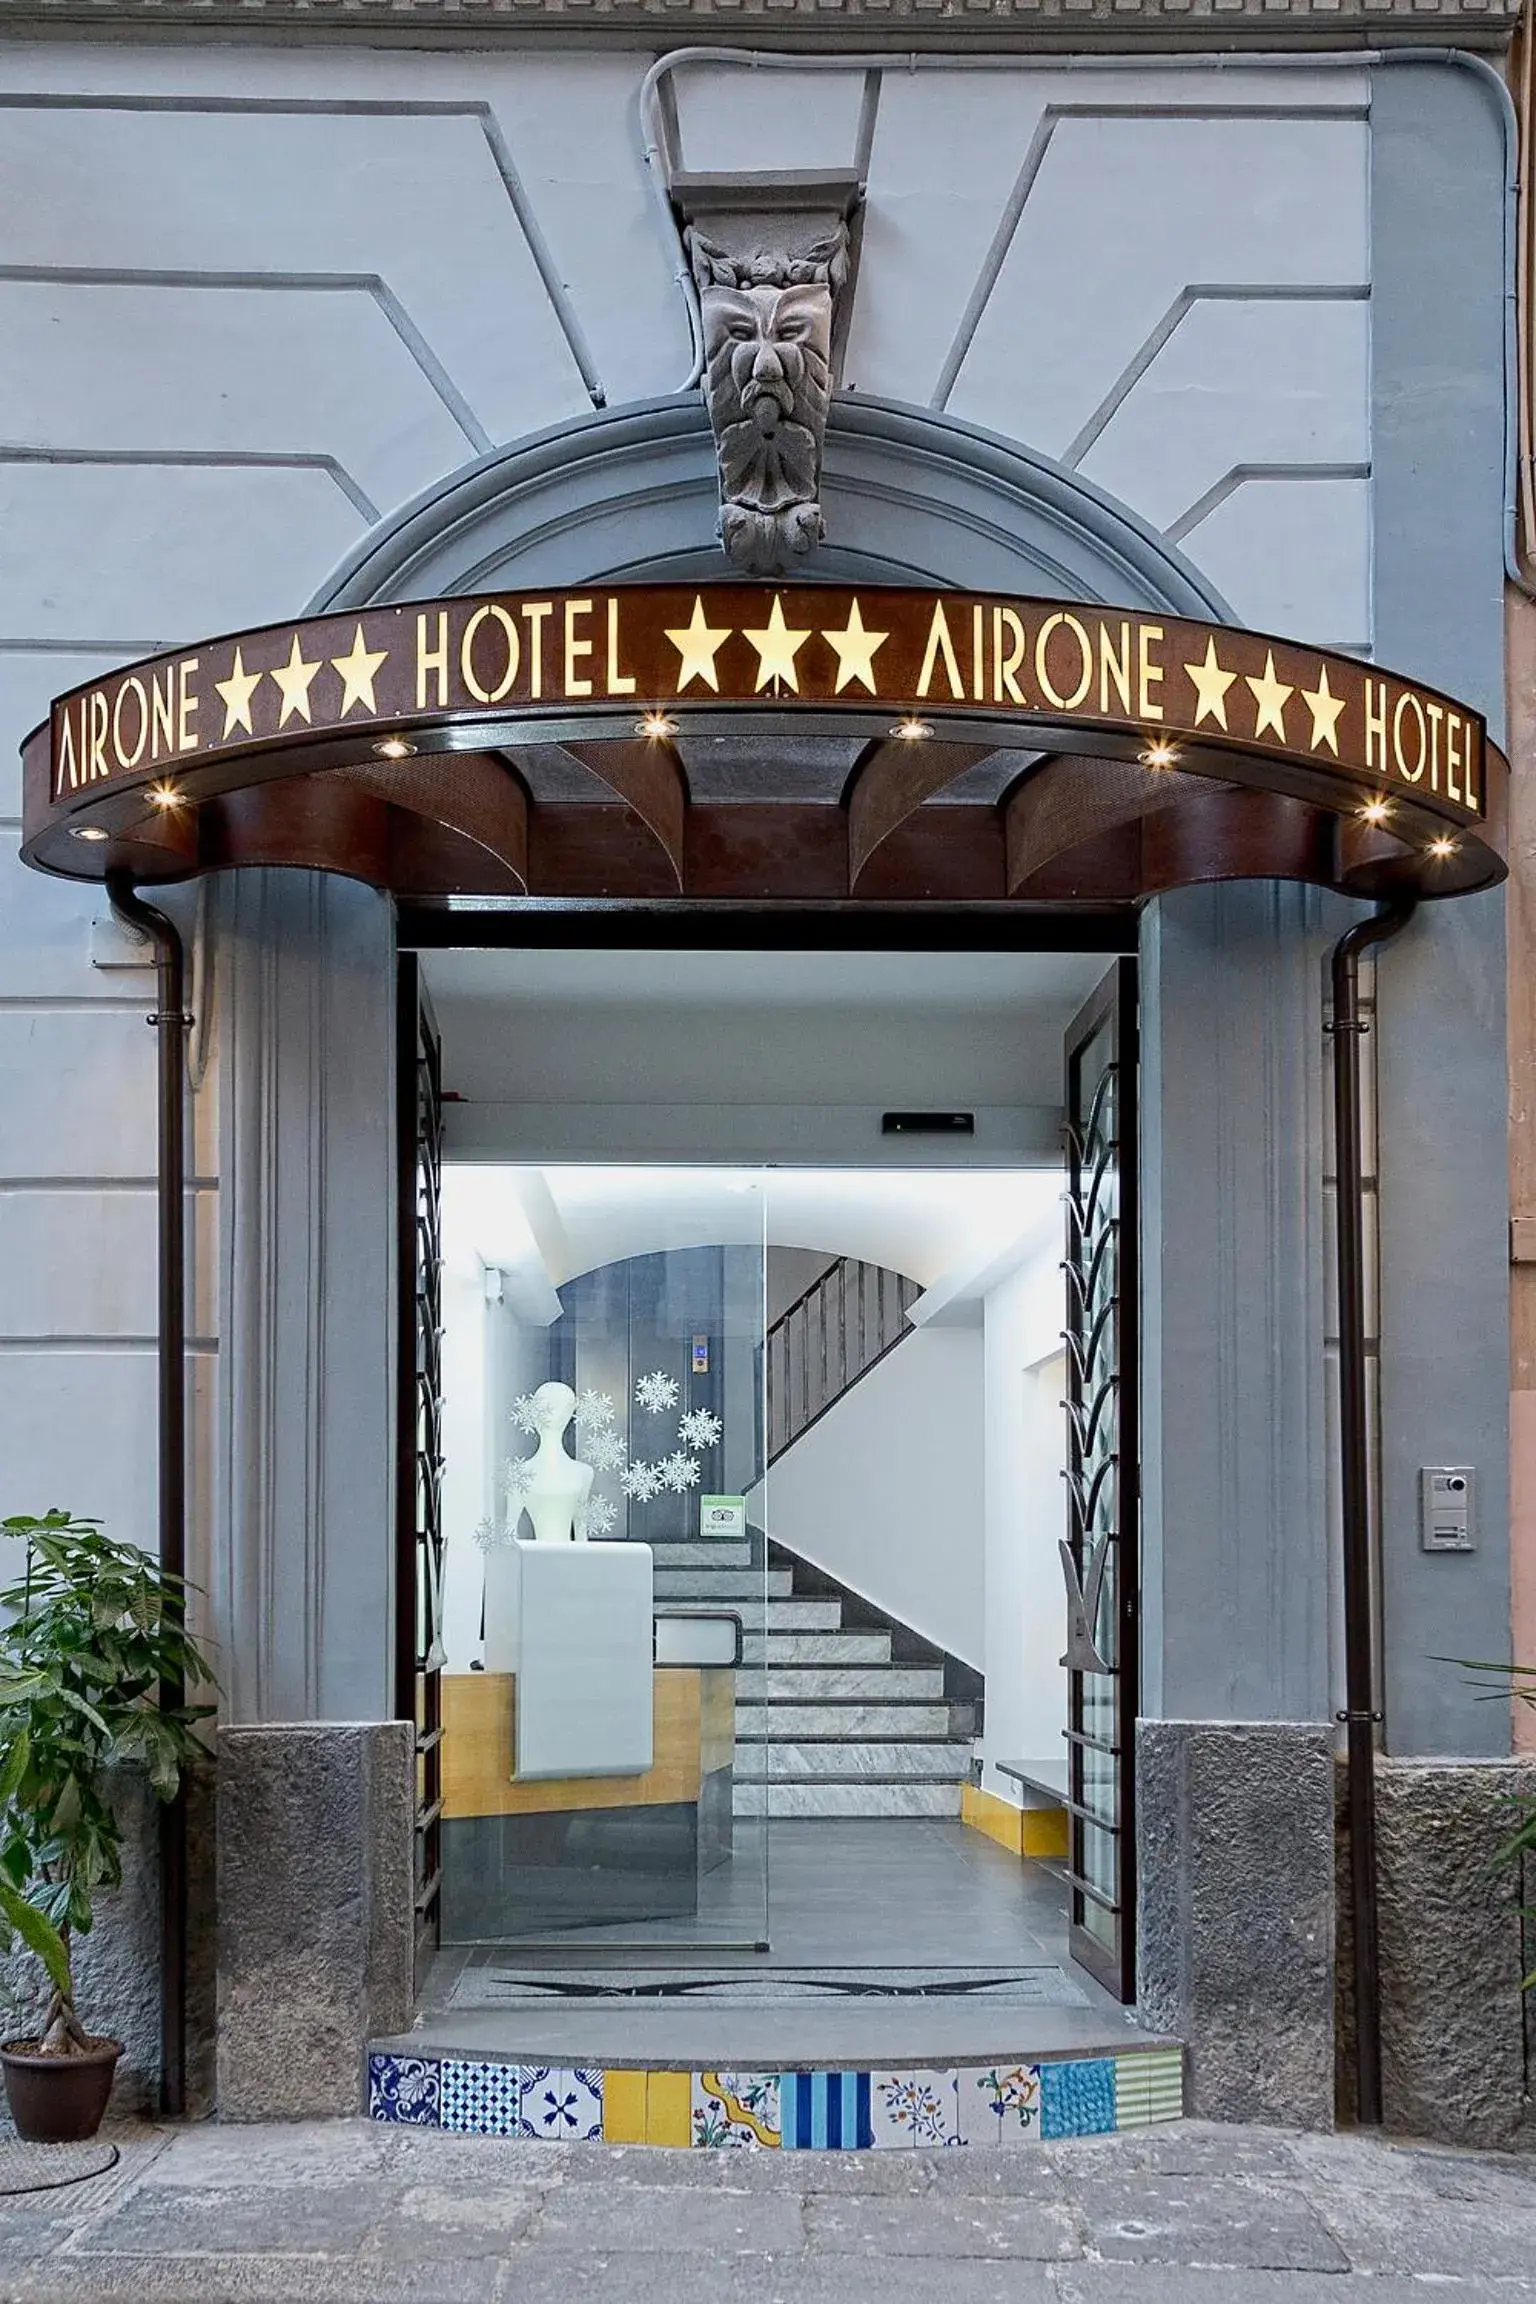 Property logo or sign in Airone Hotel